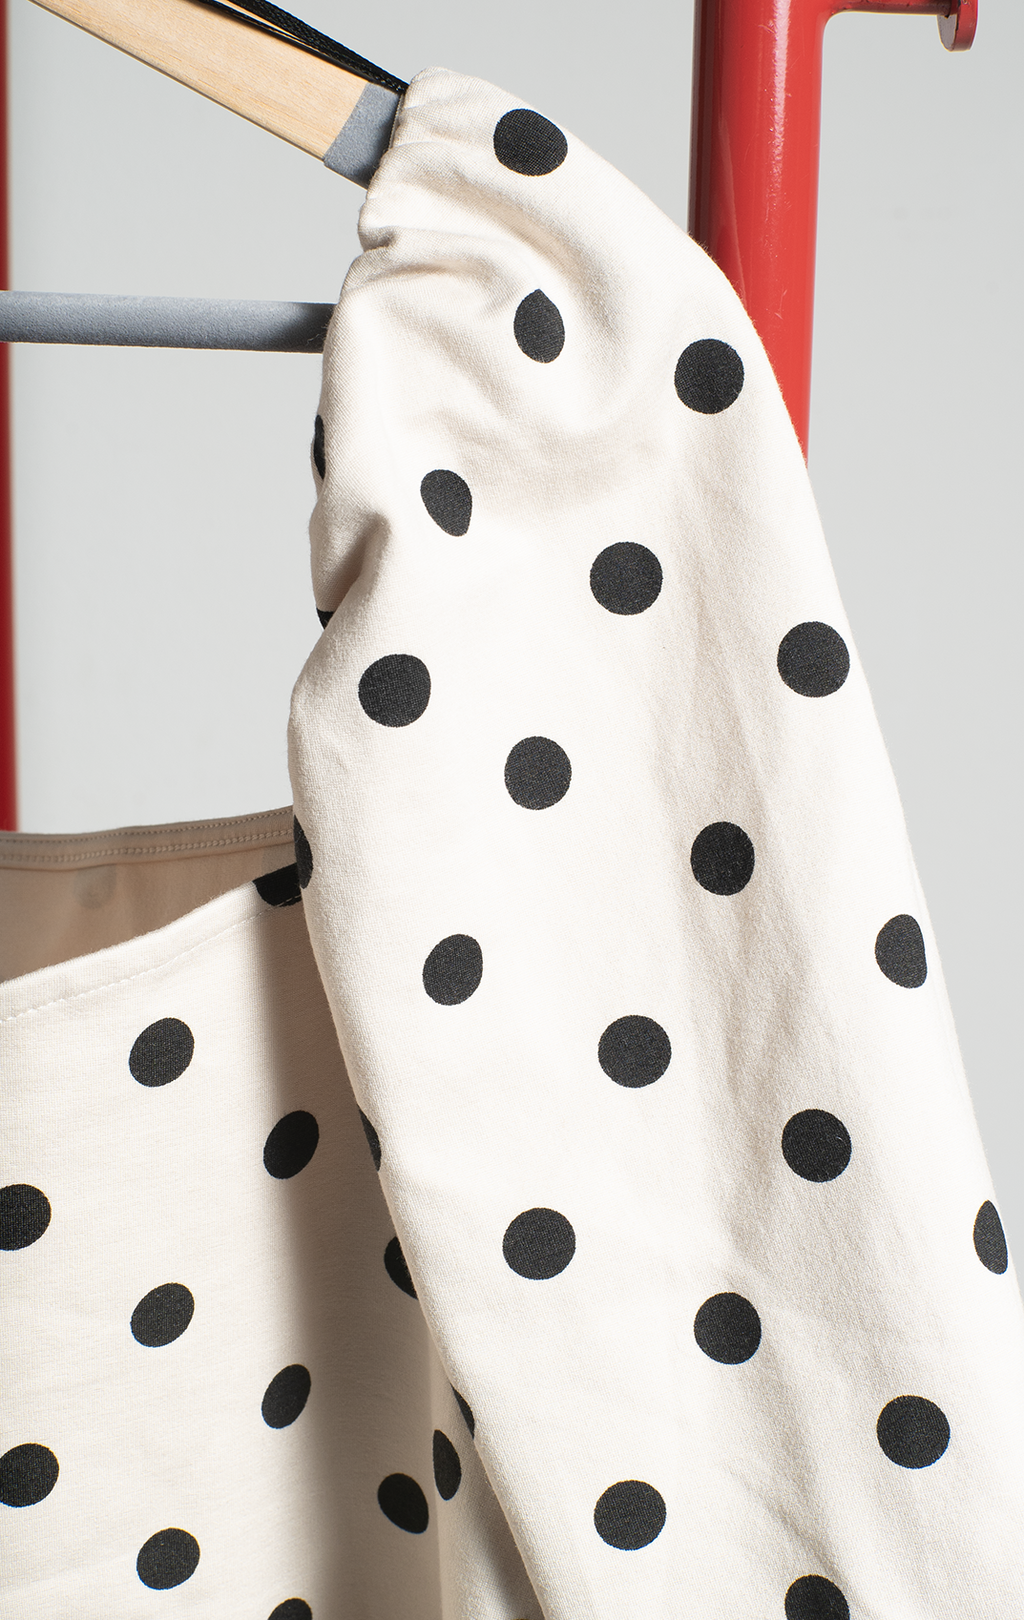 H&M TOP - Beige with polka dots black pufft sleeves - XLarge